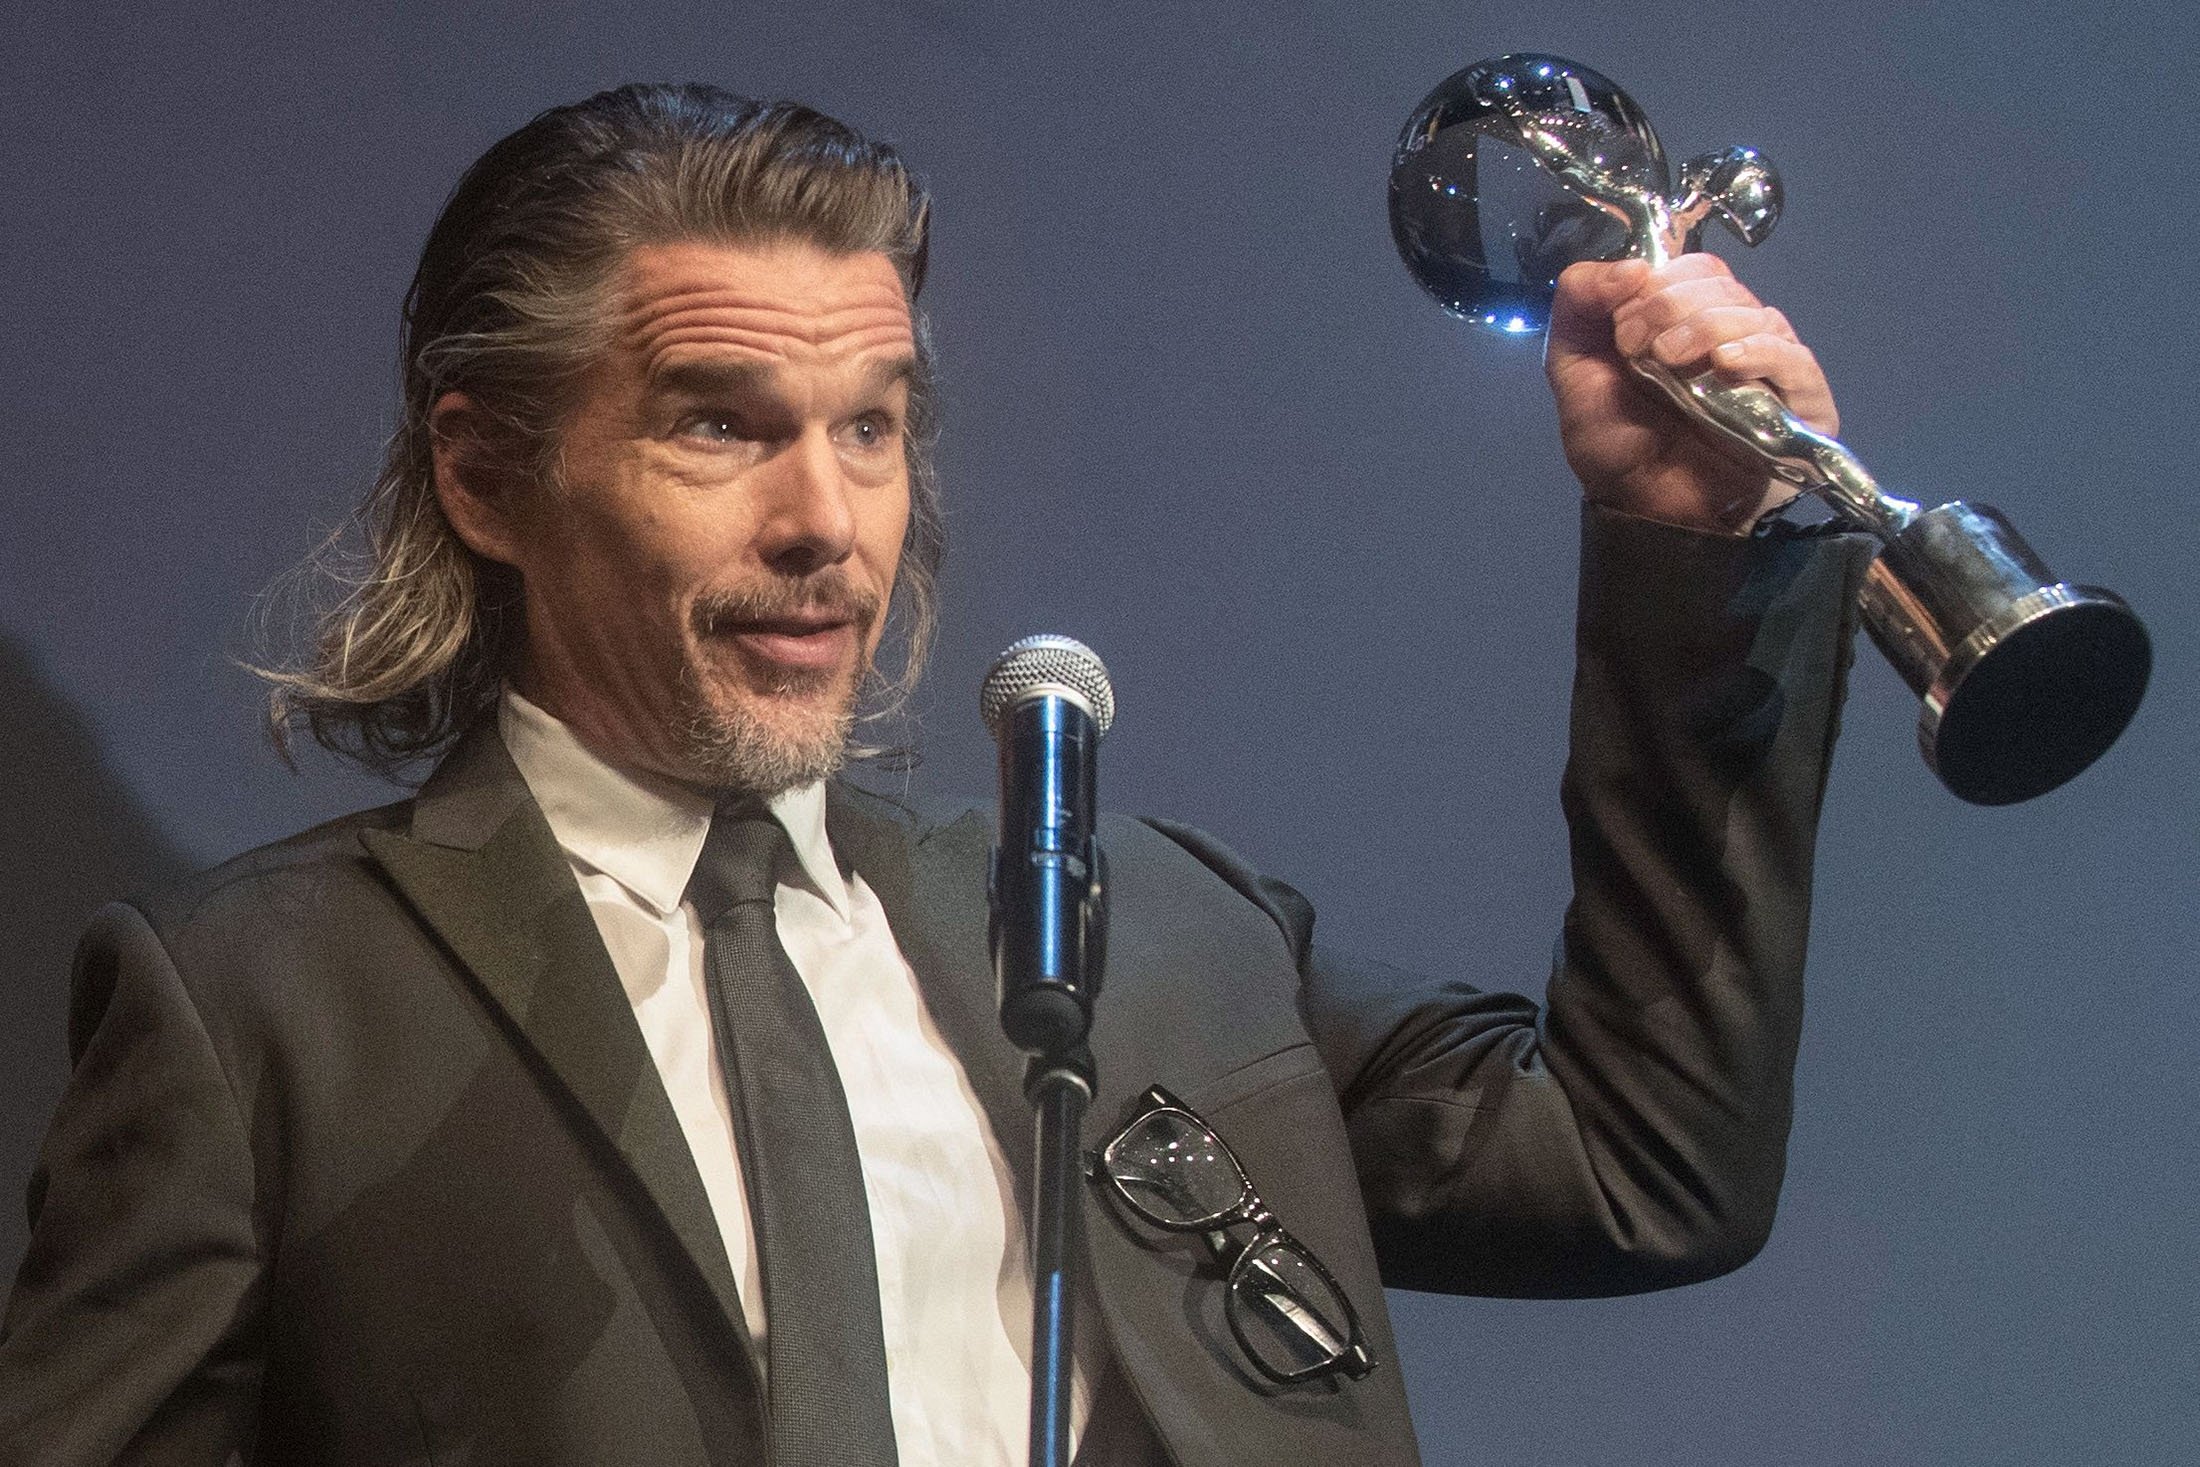 American actor and filmmaker Ethan Hawke delivers a speech during  the closing ceremony at the 55th Karlovy Vary International Film Festival (KVIFF) in Karlovy Vary, Czech Republic, Aug. 28, 2021. (AFP Photo)